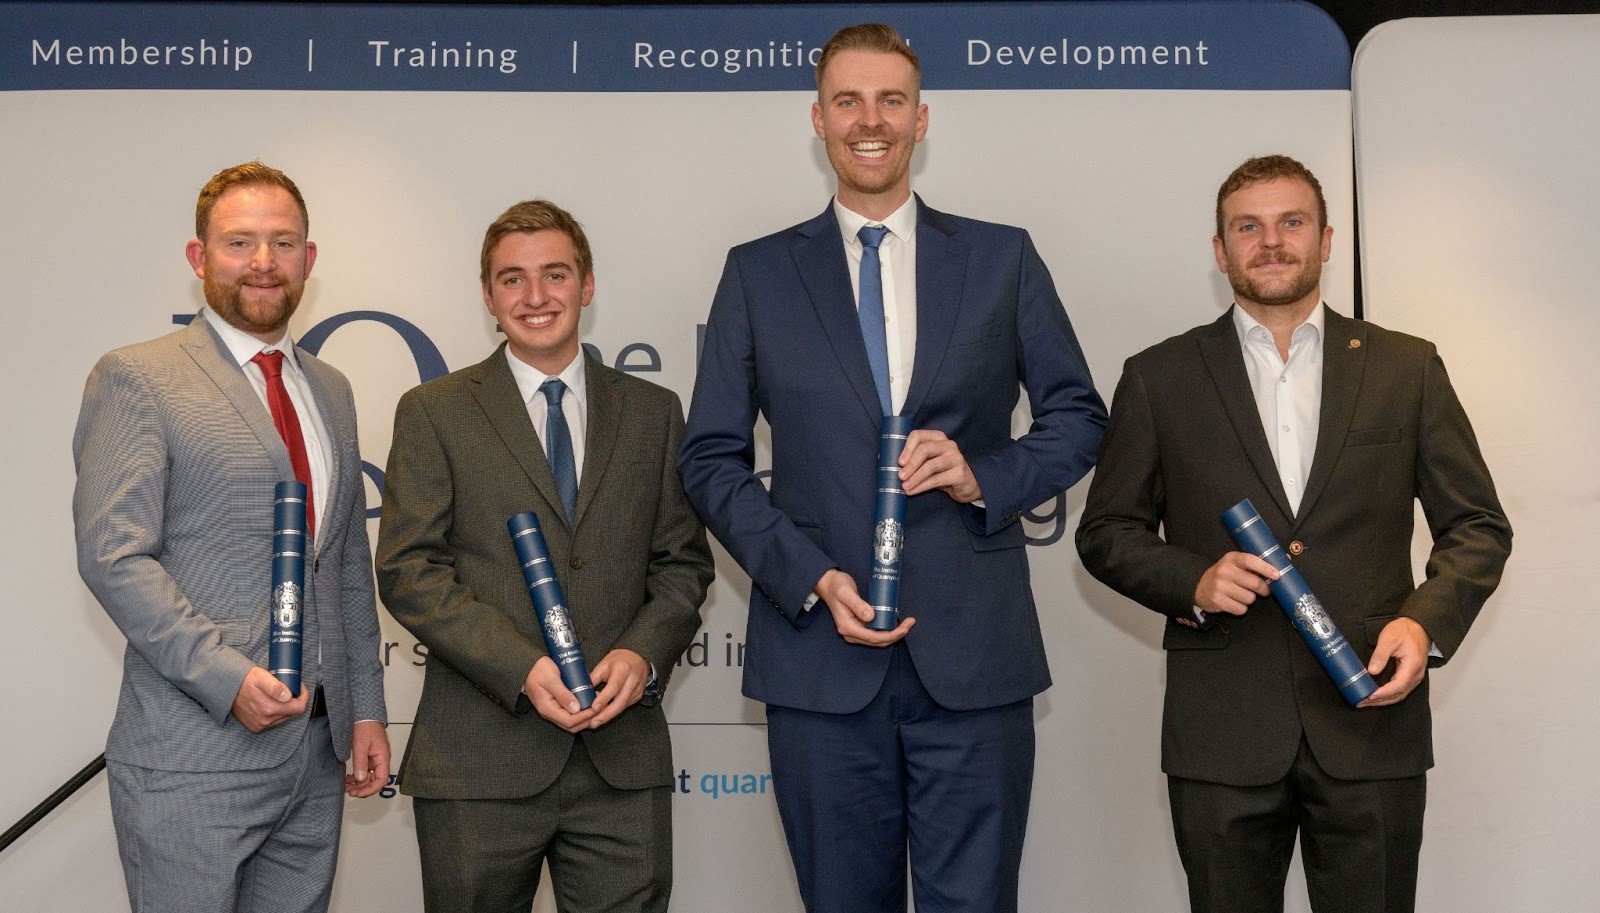 From left to right: Award winners Peter Triccas TMIQ, Ben Marsh, Oliver Kibble TMIQ, and Lewis Pinch TMIQ